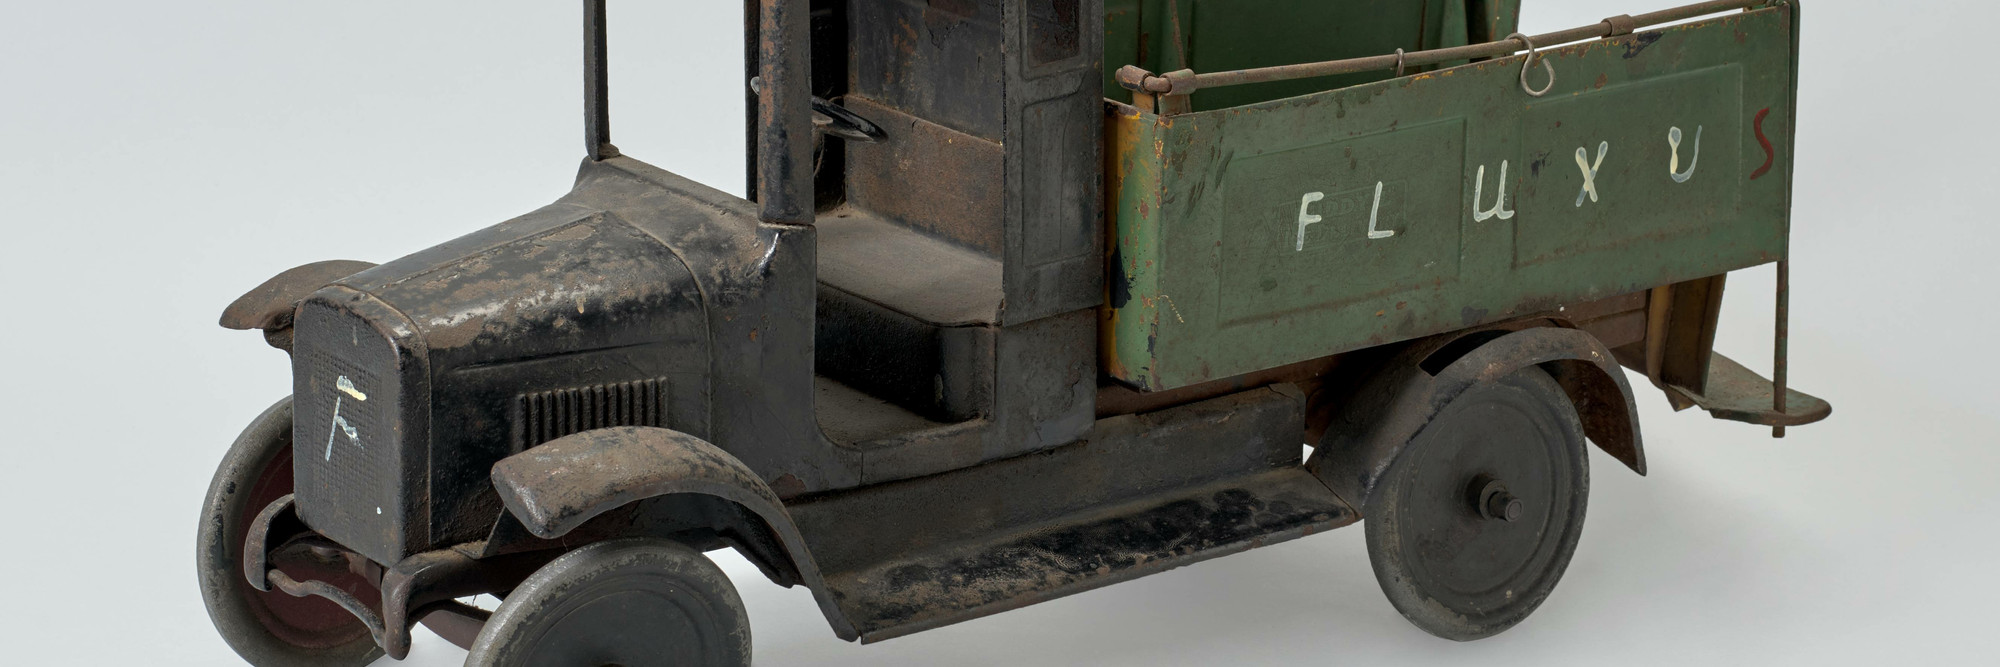 Nam June Paik. 3 F Truck. 1977. Toy truck with paint additions, 12 3/8 x 24 x 8 7/16&#34; (31.5 x 61 x 21.5 cm). The Gilbert and Lila Silverman Fluxus Collection Gift. © 2020 Nam June Paik. Photo: Robert Gerhardt